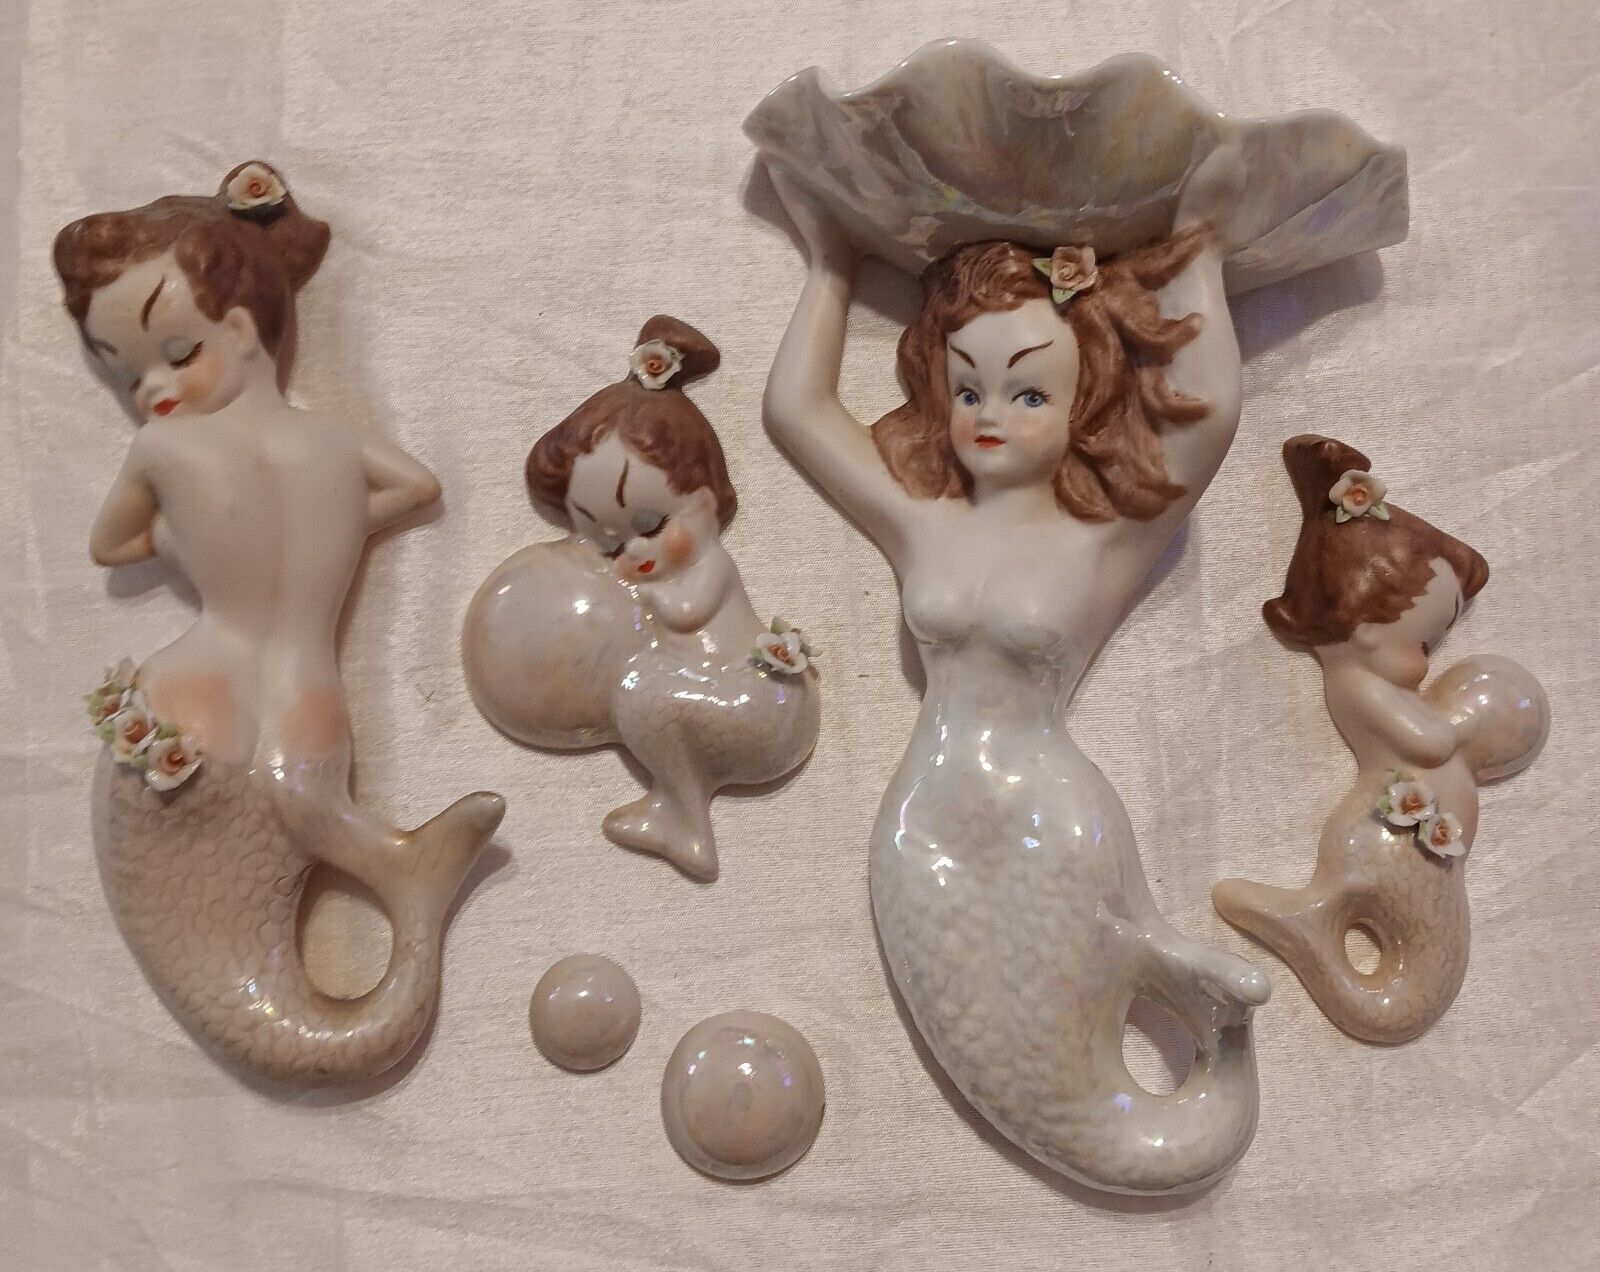 Set of 4 Vintage 1964 Ceramic Mermaids Bathroom Wall Plaques With 2 Bubbles